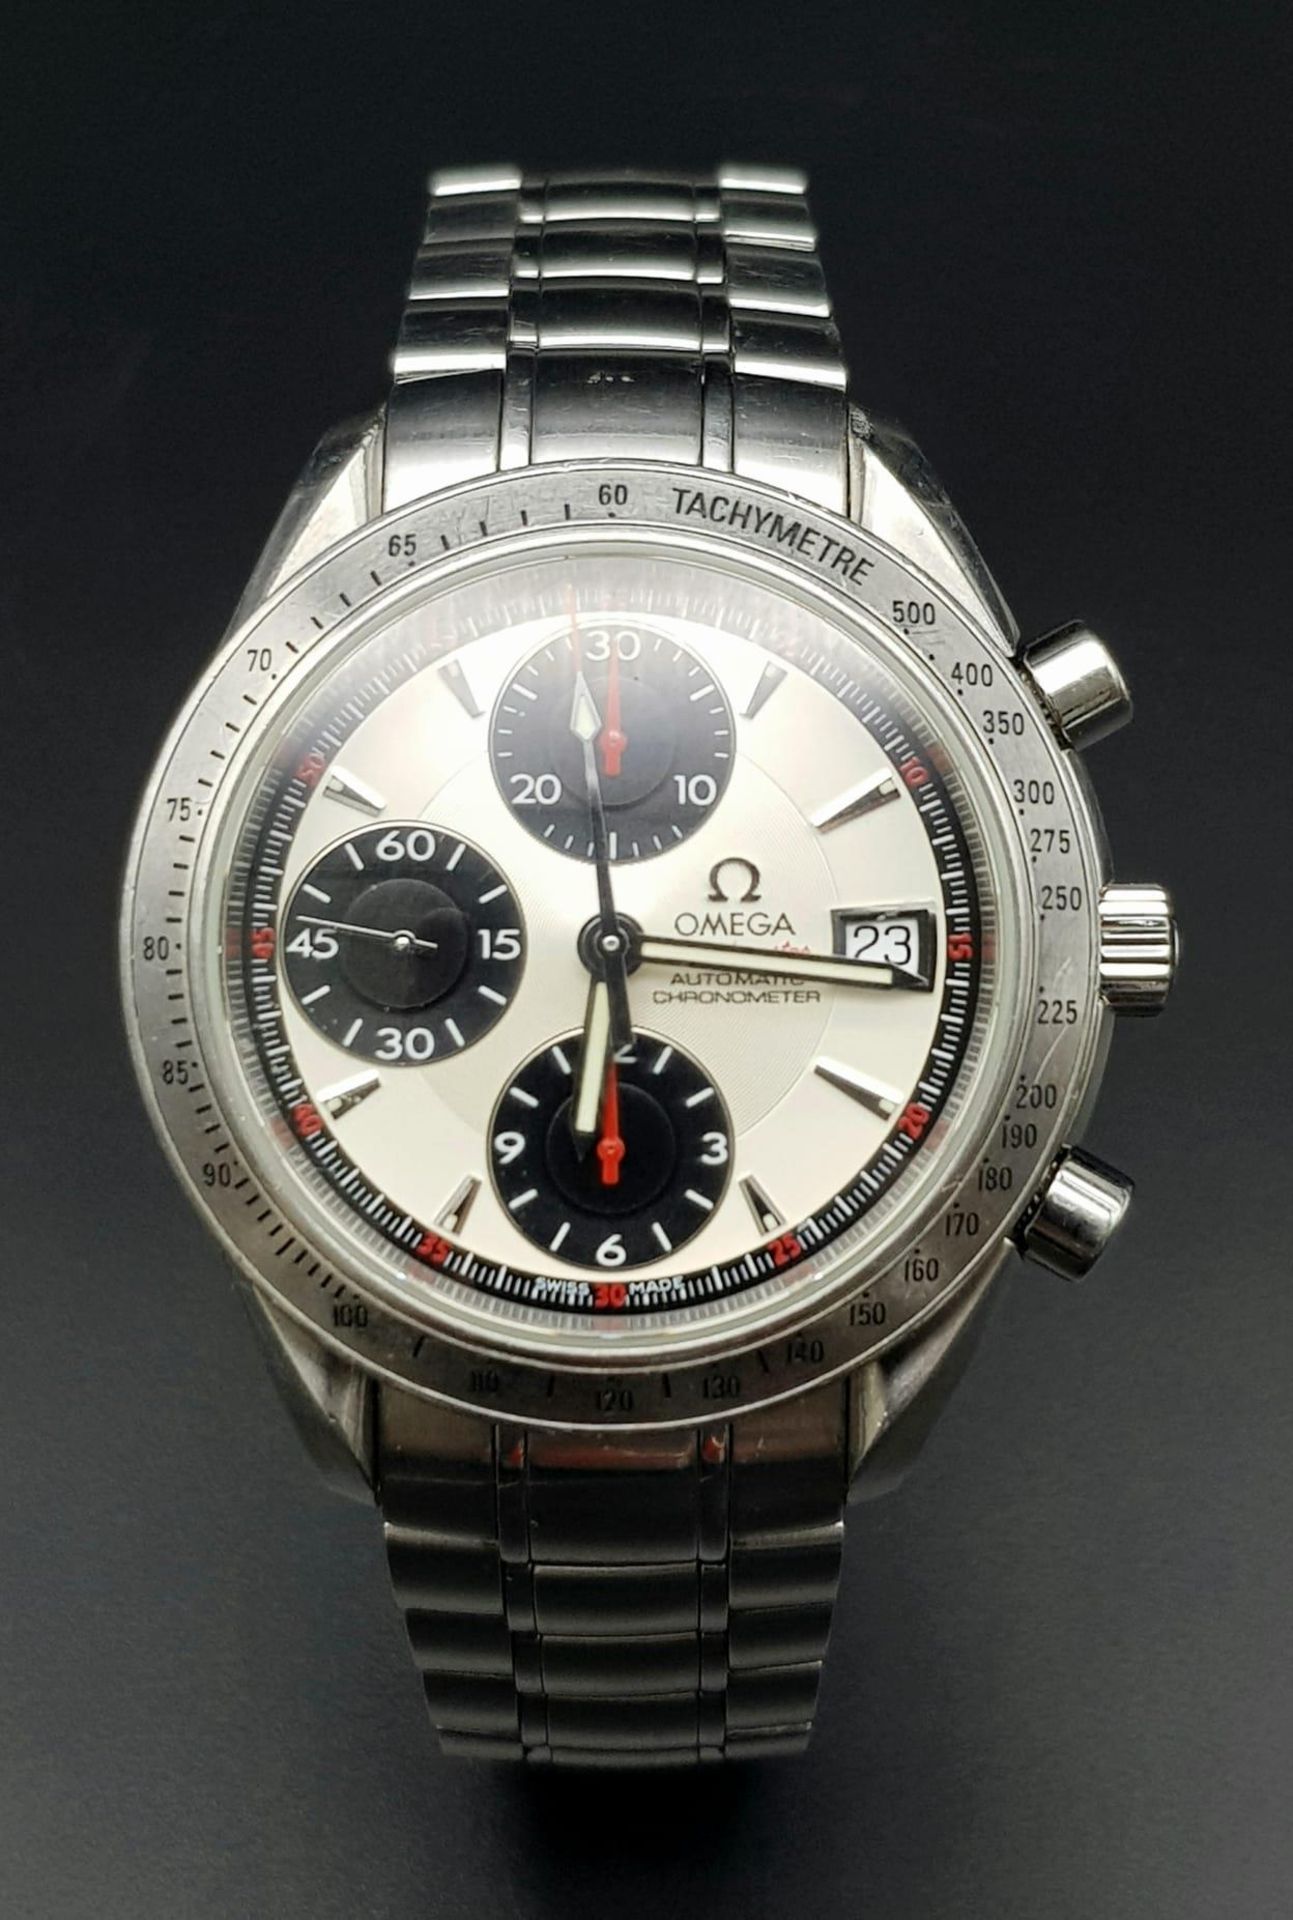 AN OMEGA "SPEEDMASTER"CHRONOMETER AUTOMATIC WITH 3 SUBDIALS AND DATE BOX IN ORIGINAL BOX . 40mm